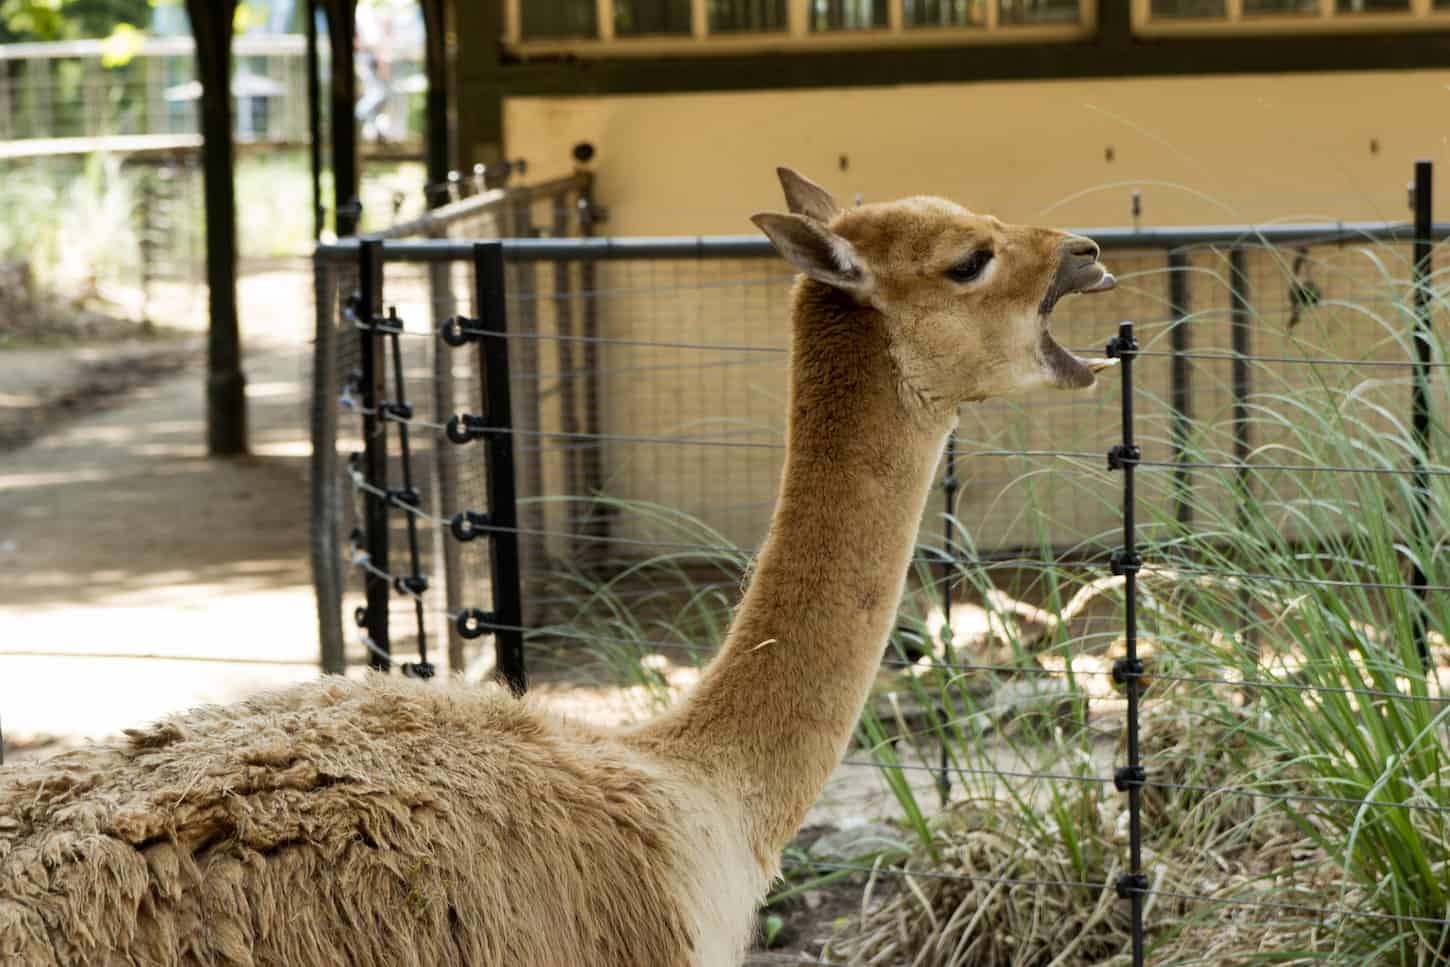 An image of a llama on the farm that looks like making a sound to express a certain emotion.